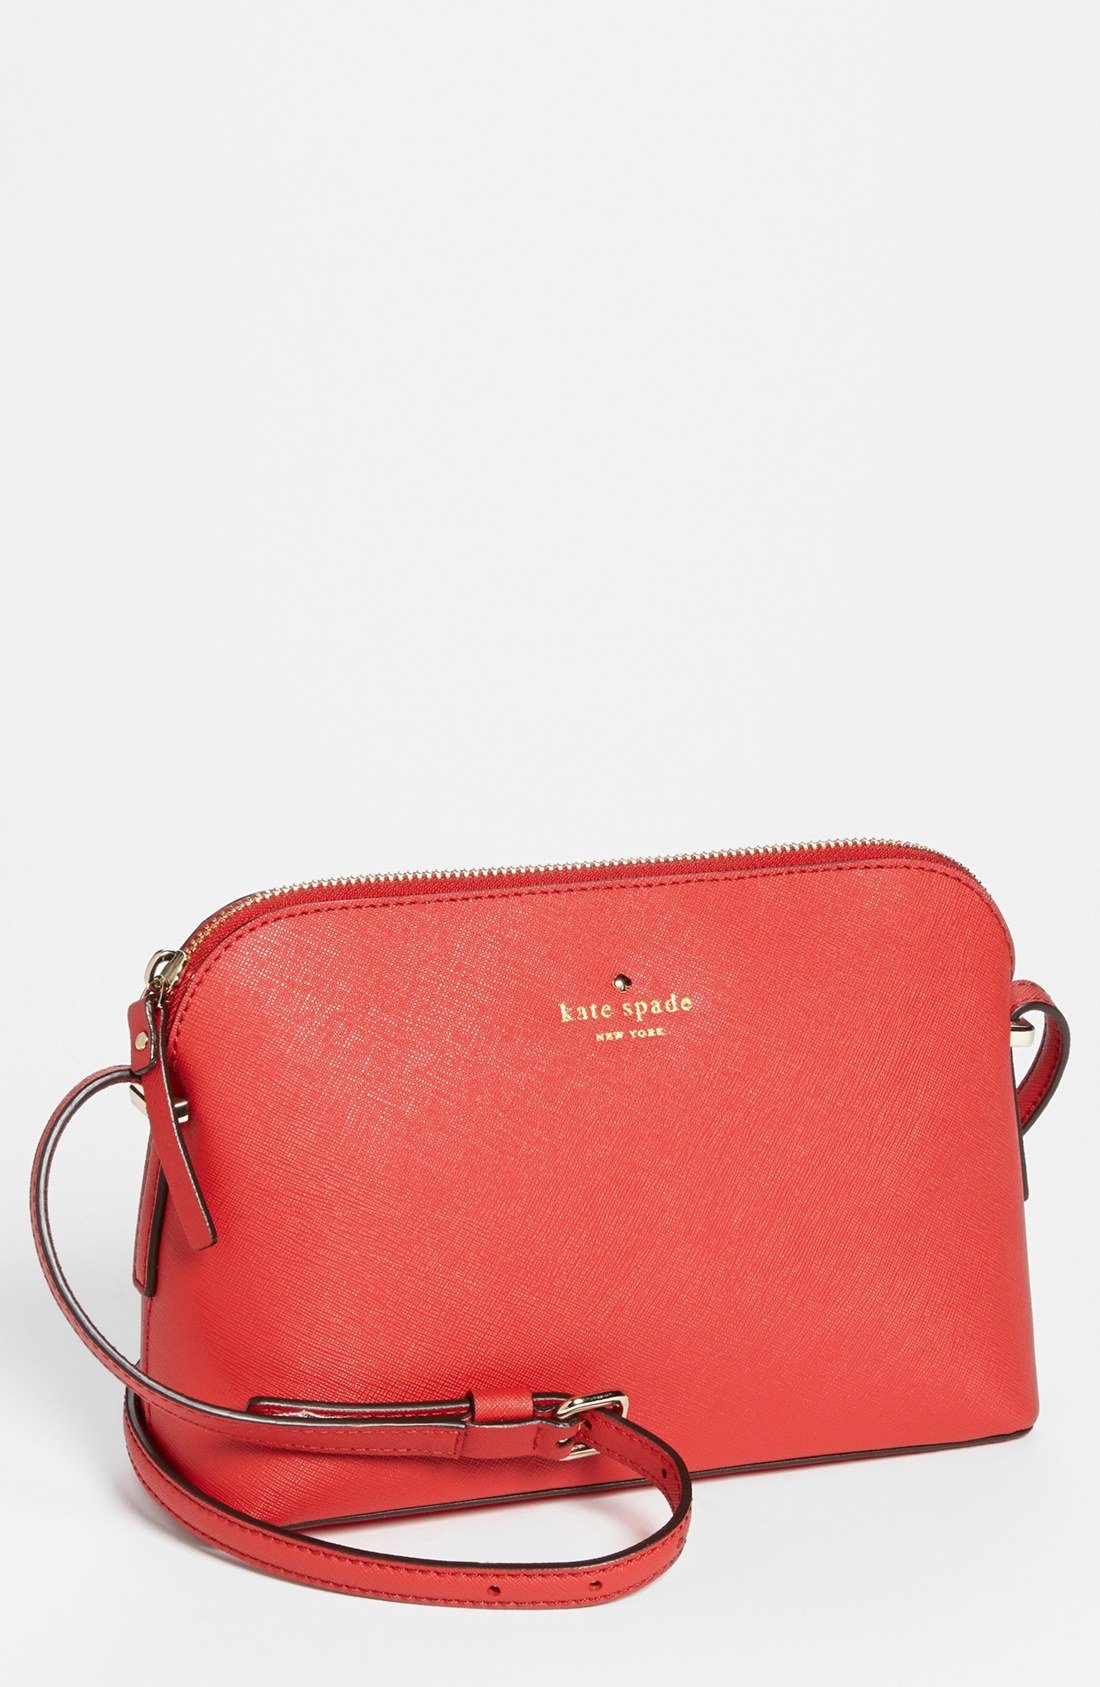 Red Handbag Kate Spade | Confederated Tribes of the Umatilla Indian Reservation